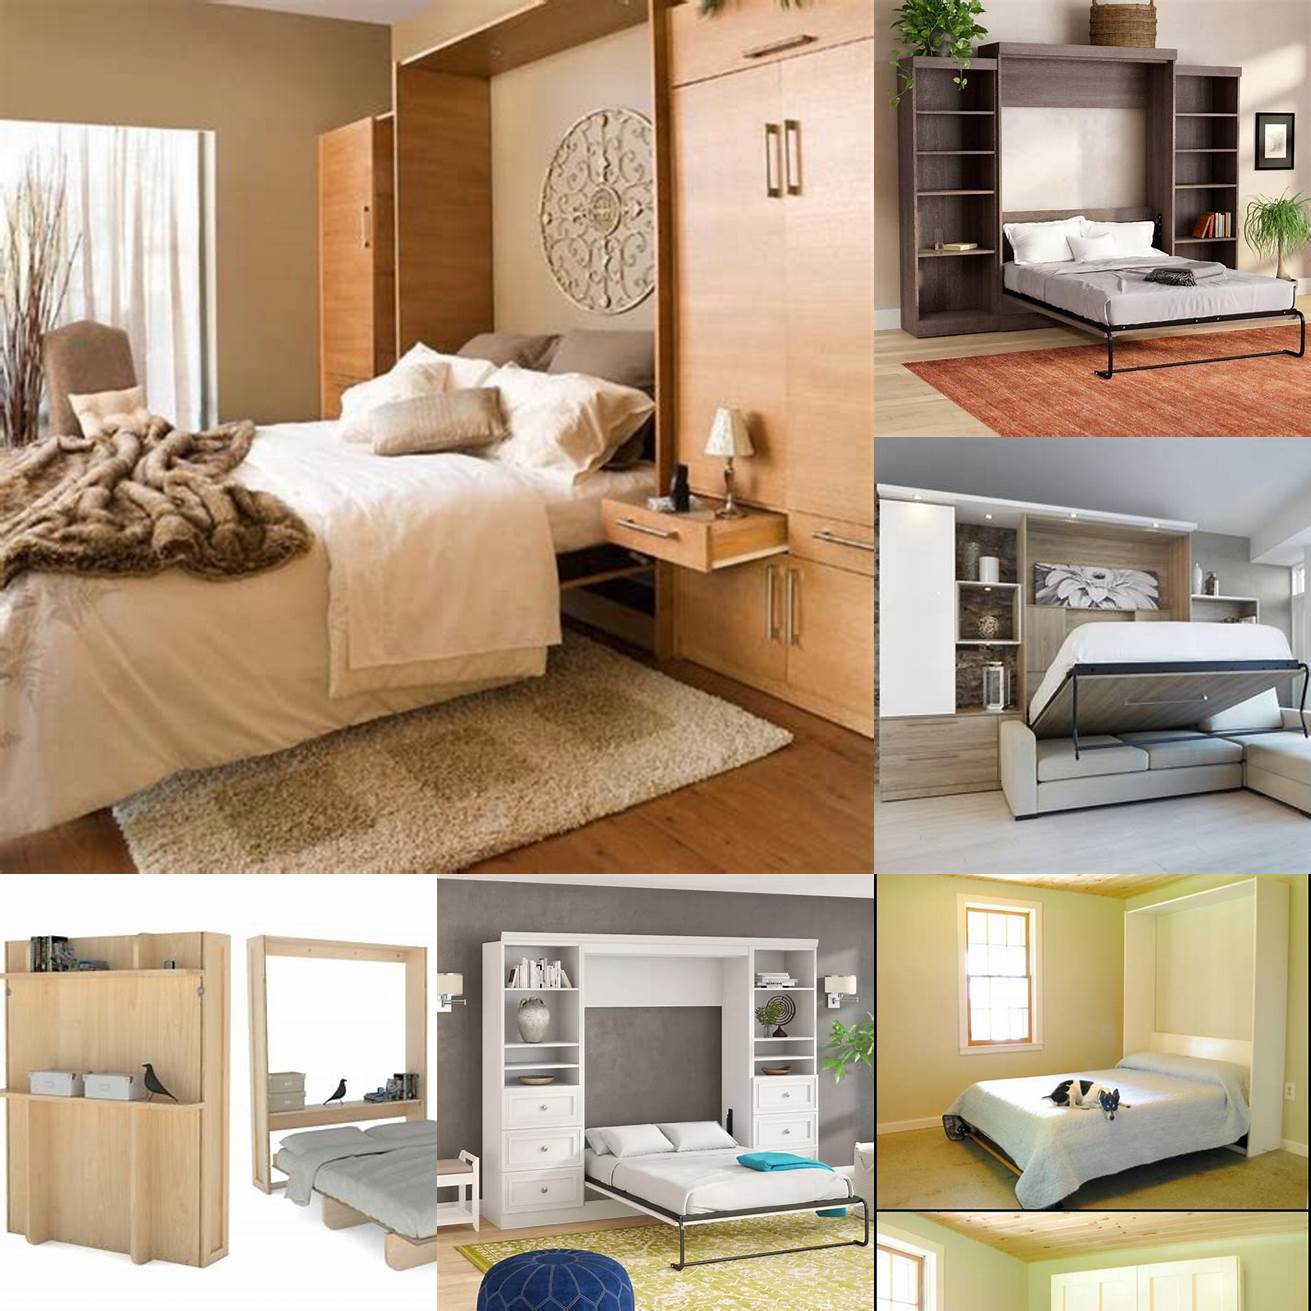 A Murphy Bed can be tucked away when not in use freeing up valuable floor space